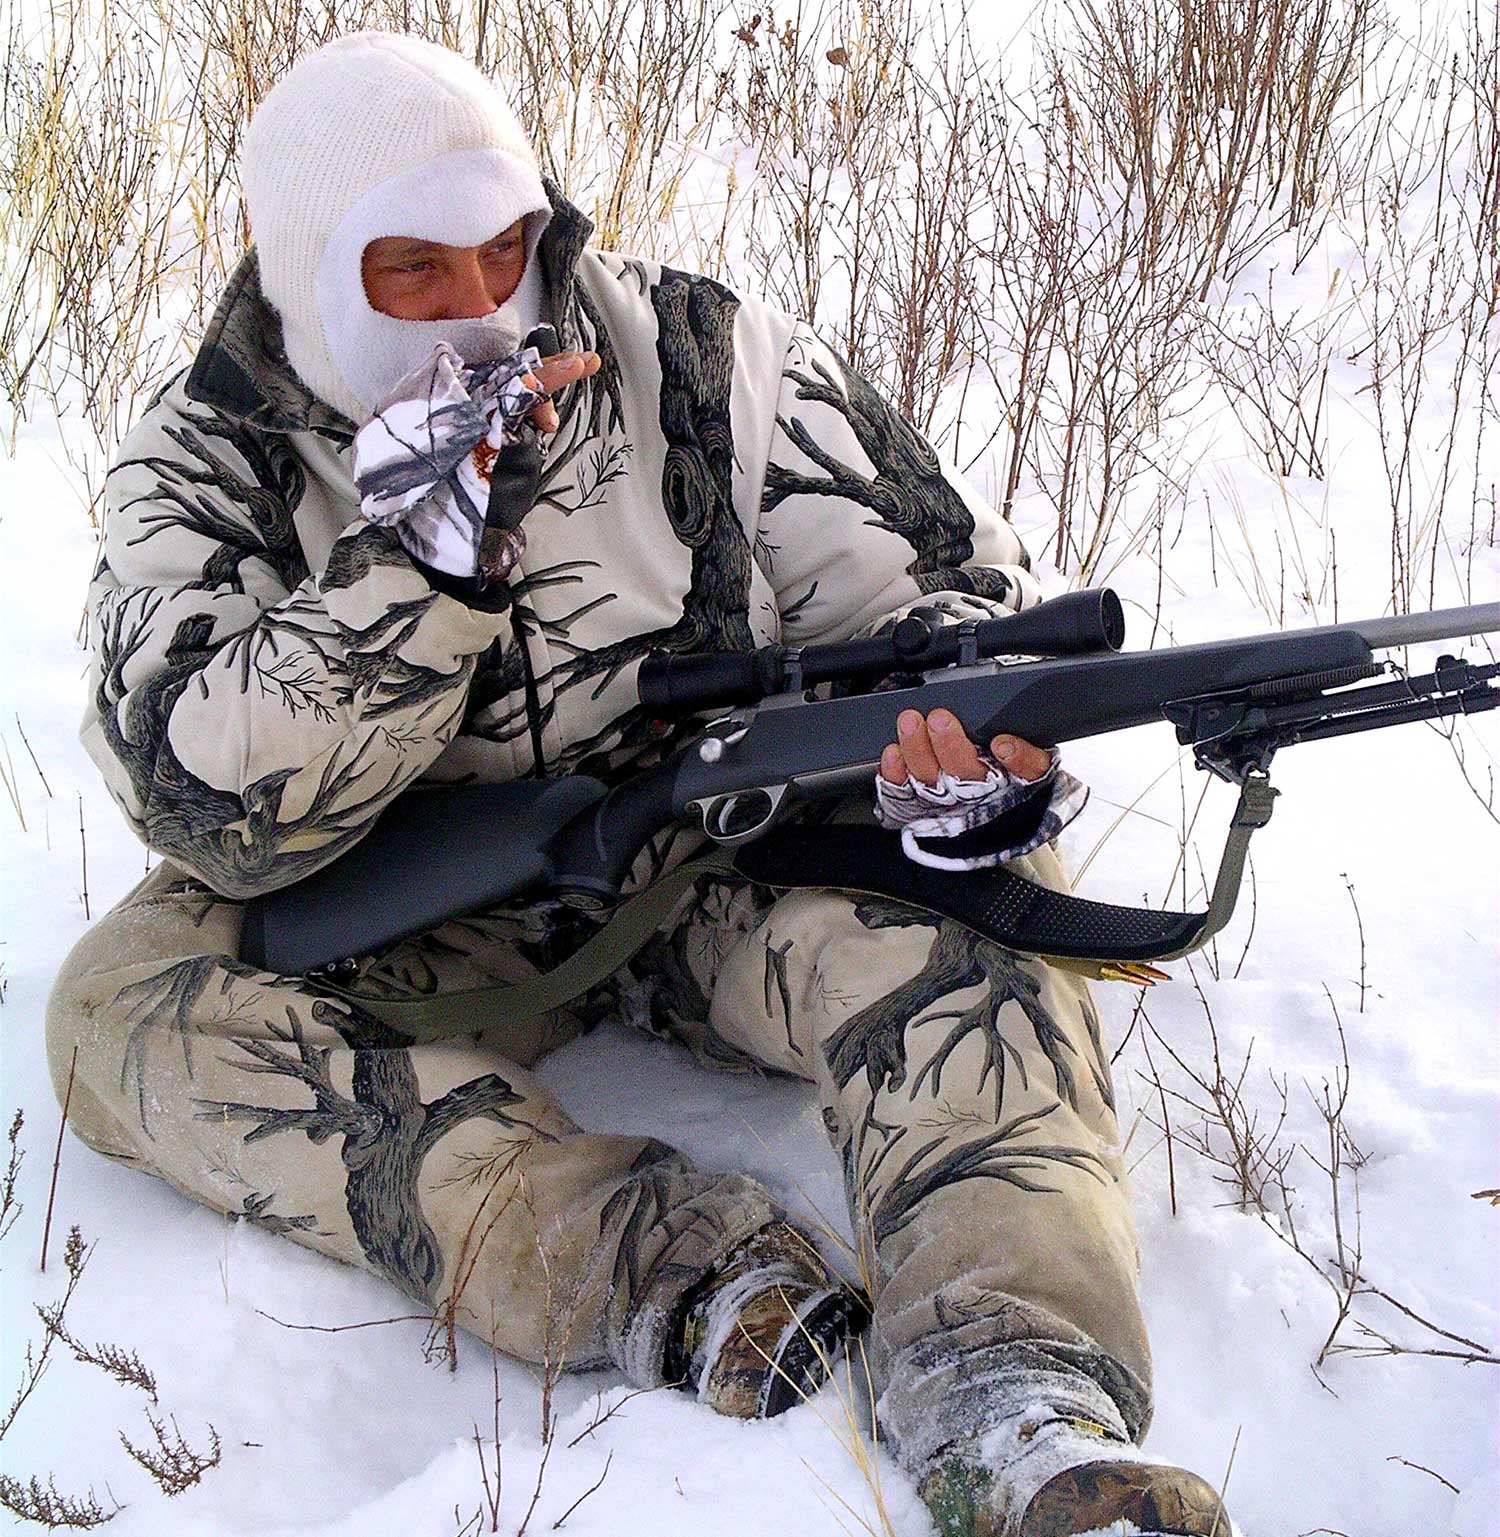 A hunter sitting in the snow.